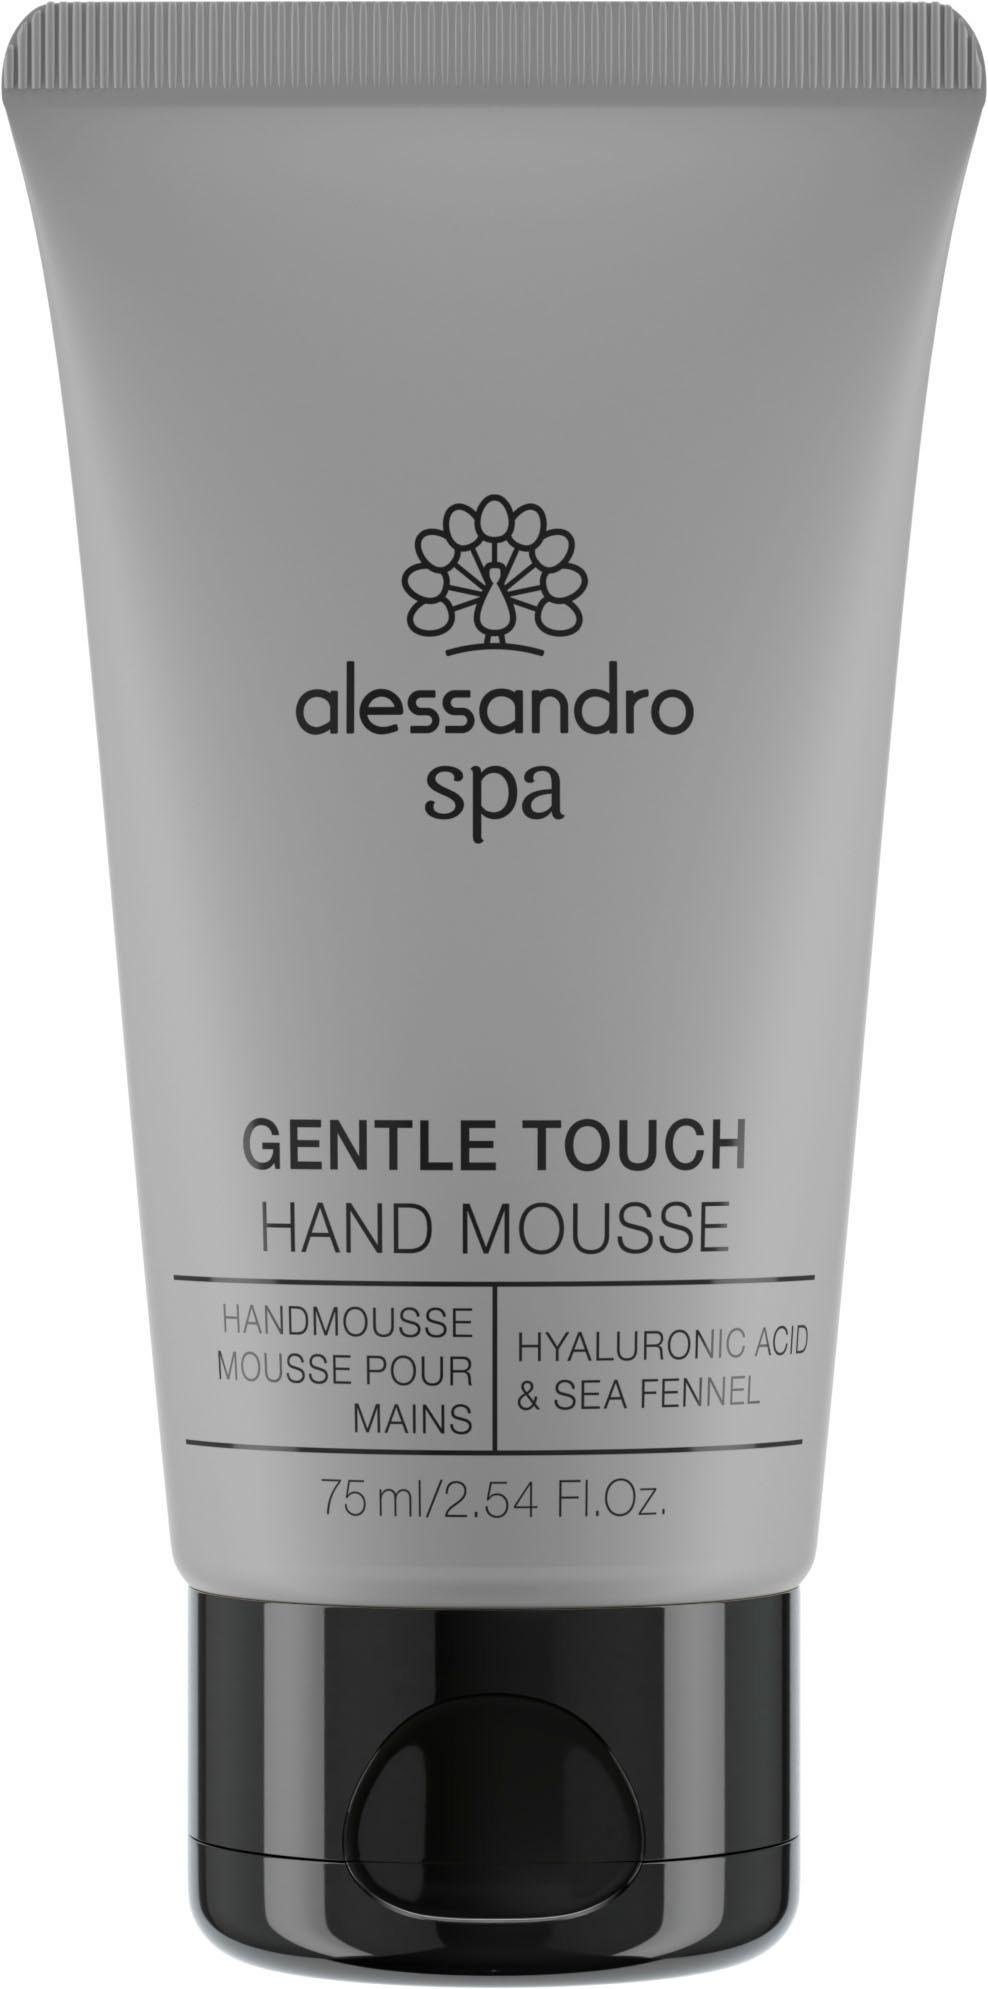 TOUCH alessandro SPA Handmousse GENTLE international